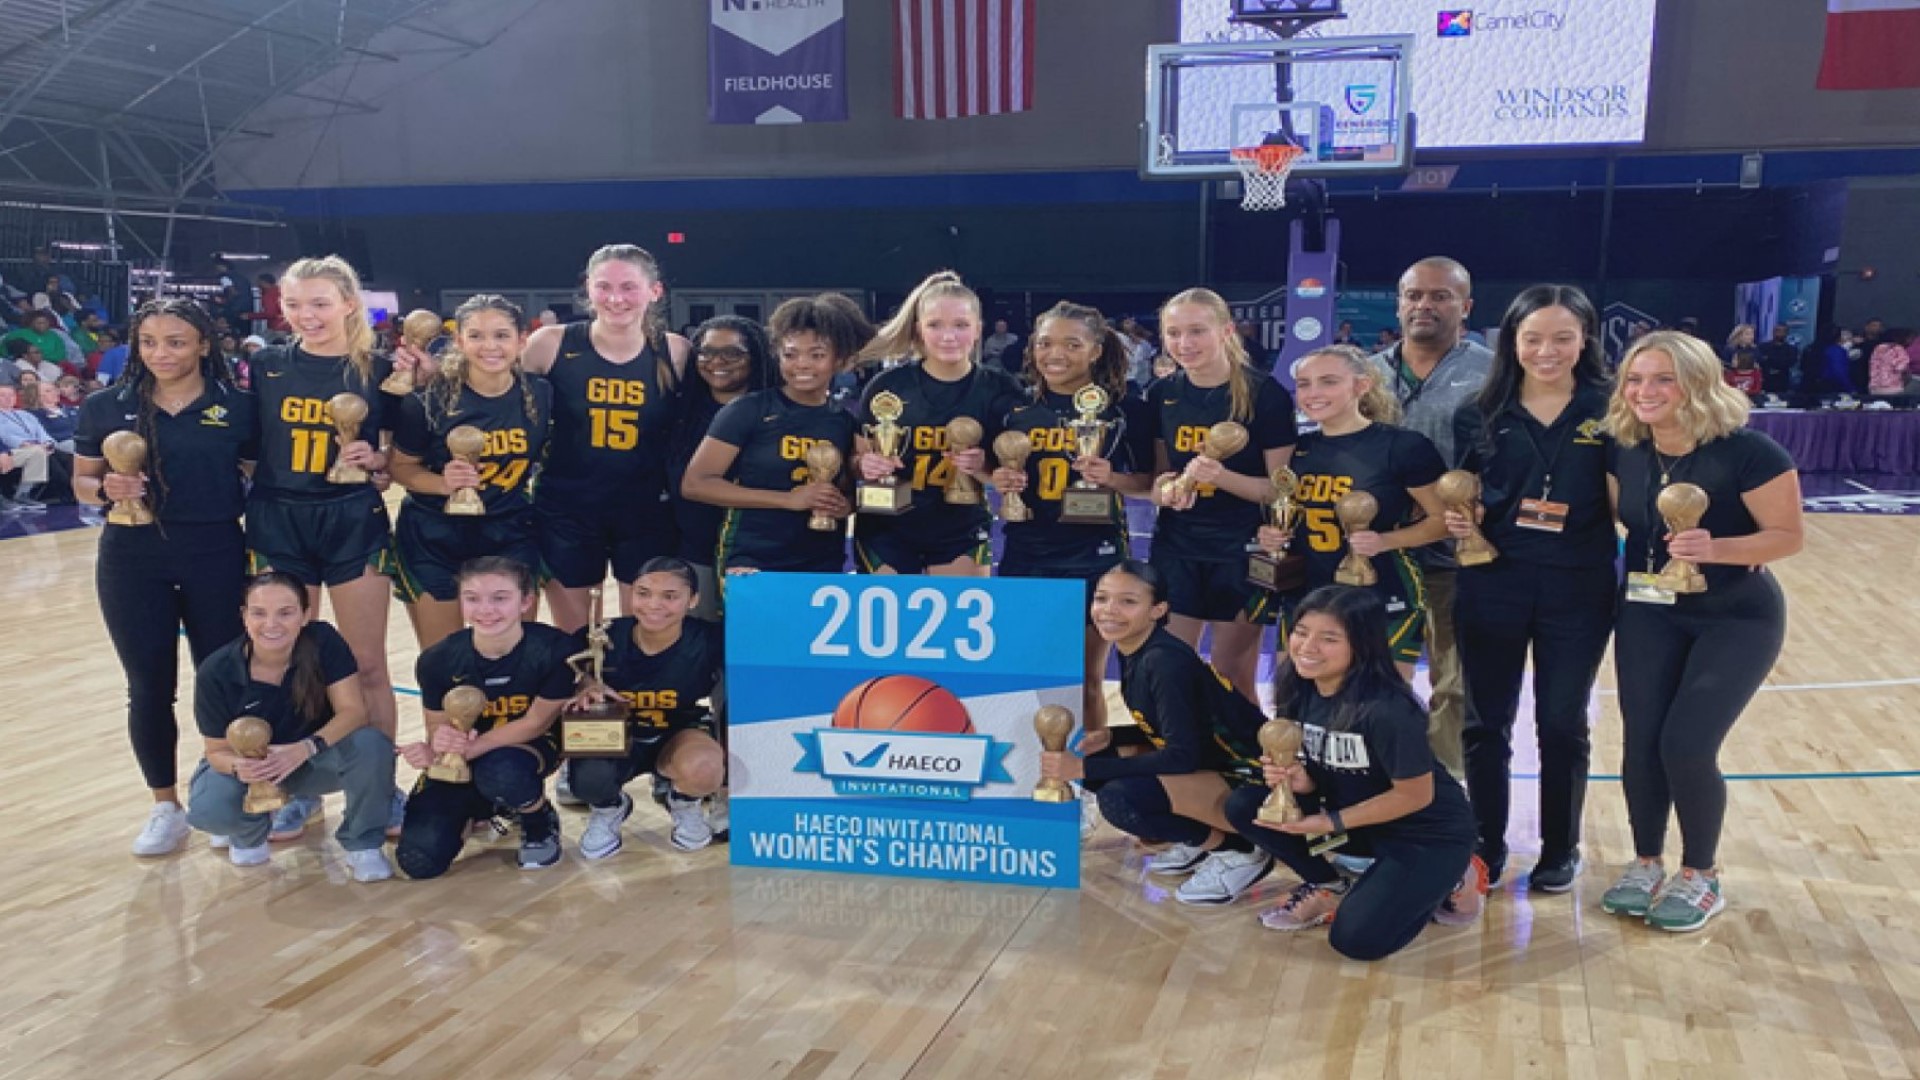 The Bengals win 55-33 to claim the first Women's Championship in school history